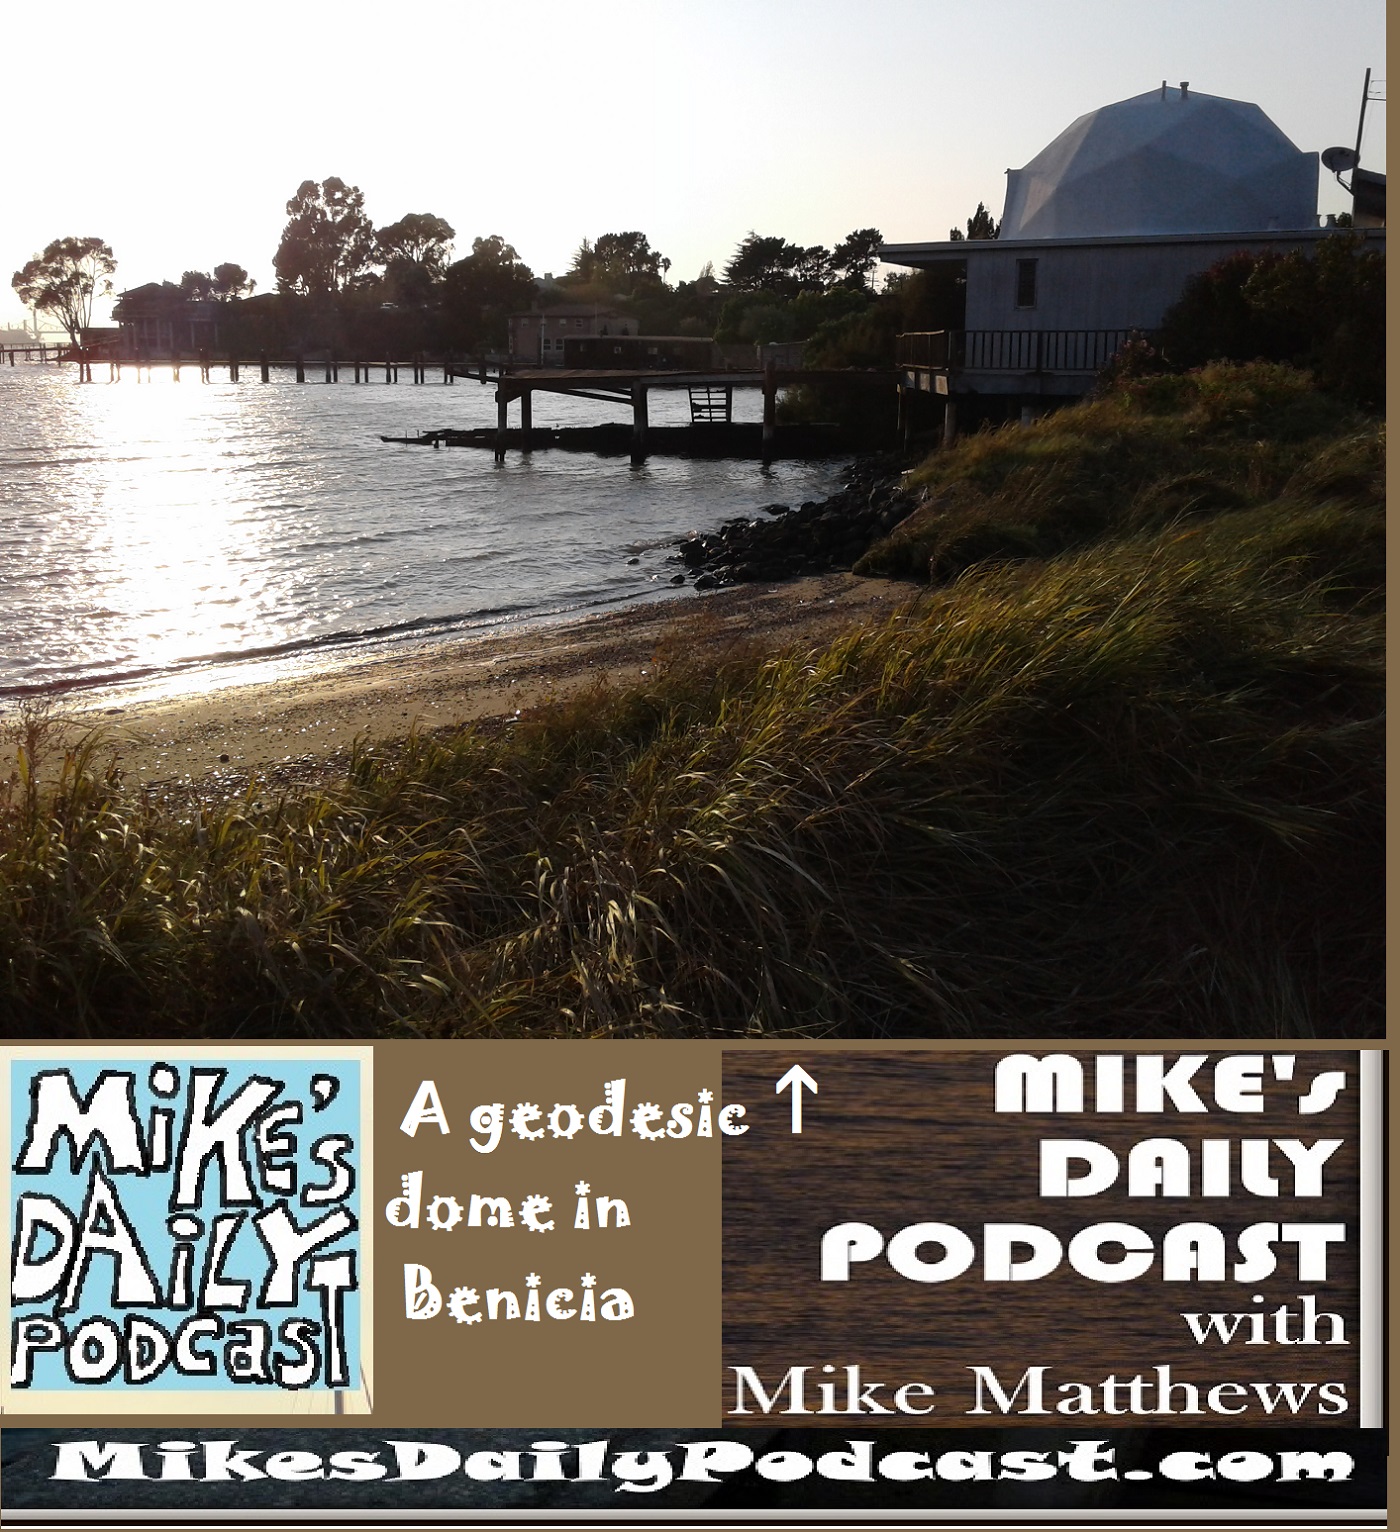 MIKEs DAILY PODCAST 1164 Benicia geodesic dome